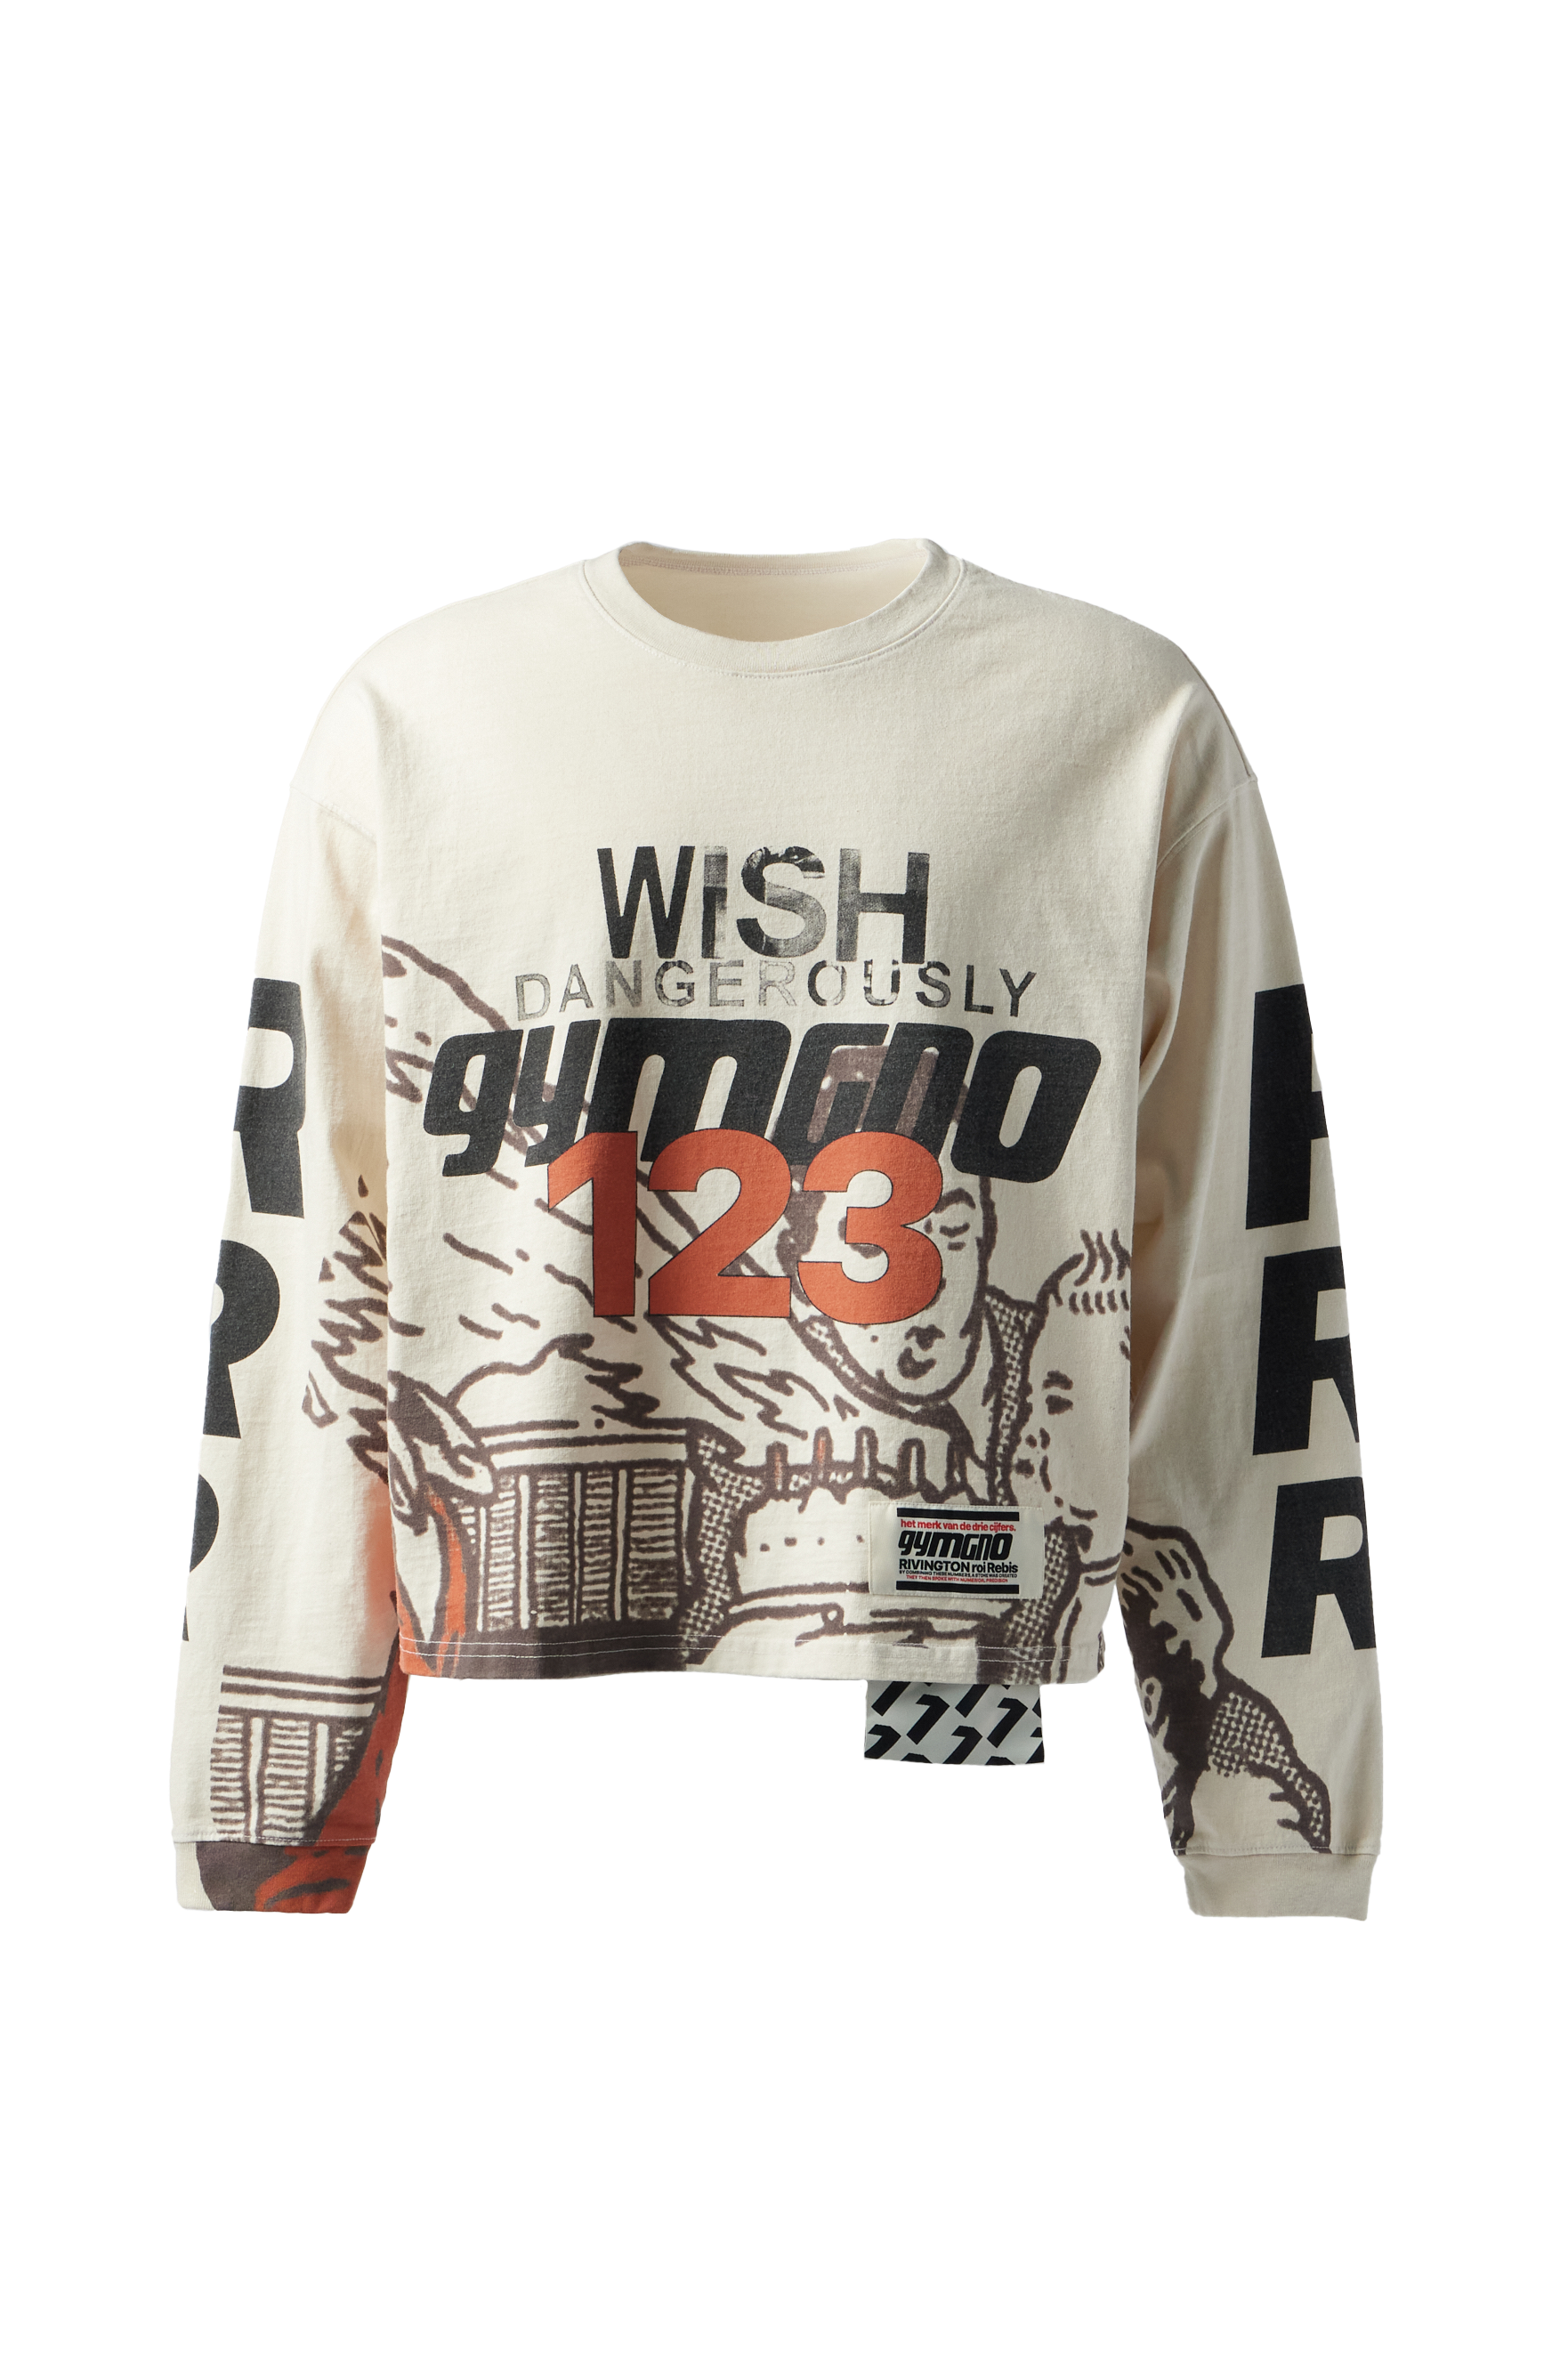 RRR123 - Wish Dangerously L/S Tee product image